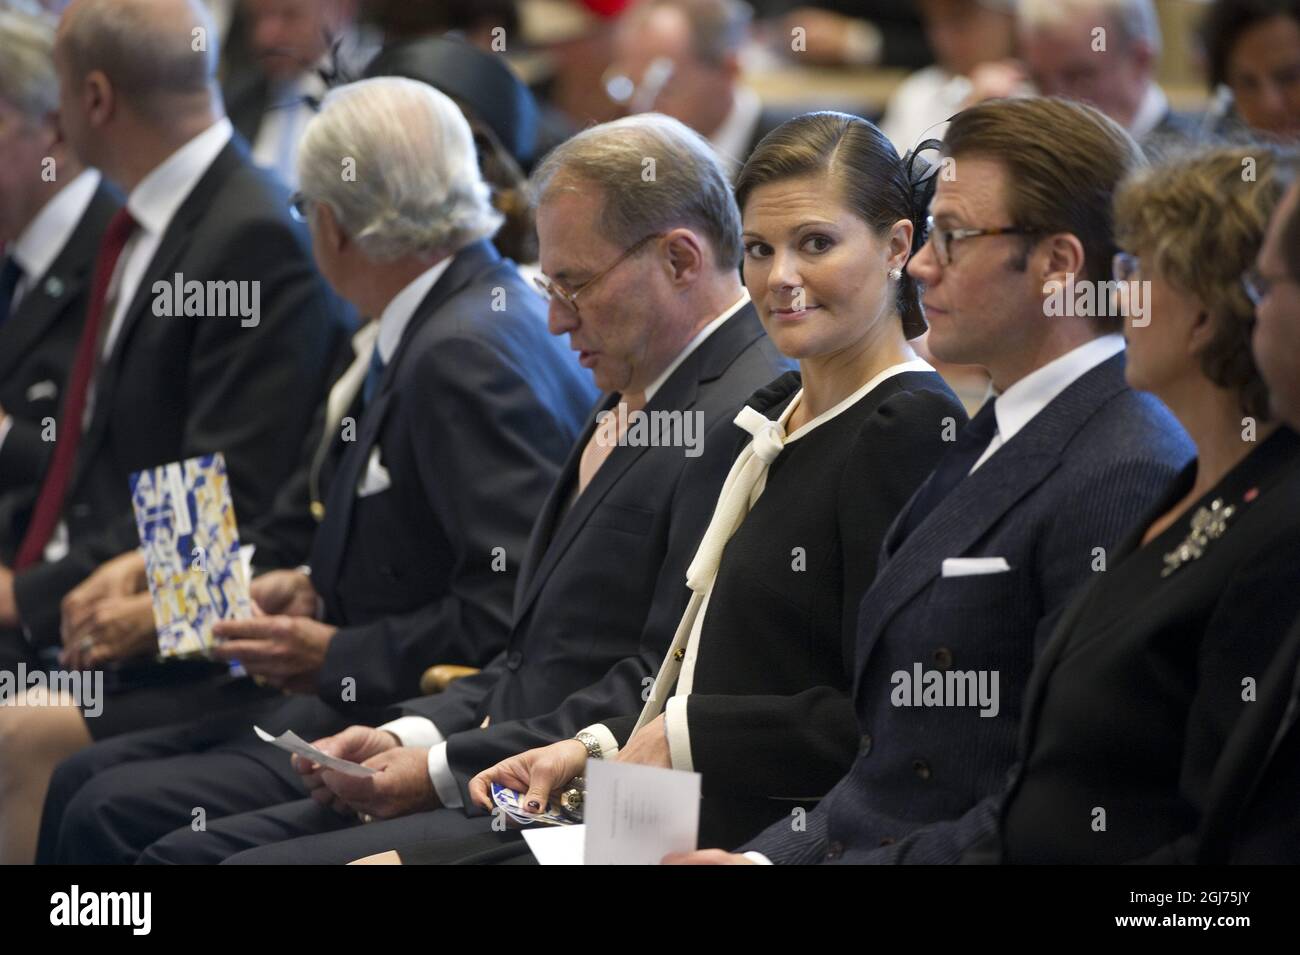 Speaker of the House of Parliament, Per Westerberg, Crown Princess Victoria and Prince Daniel during the opening of the House of the Parliament in Stockholm, Sweden, September 15, 2011 Stock Photo